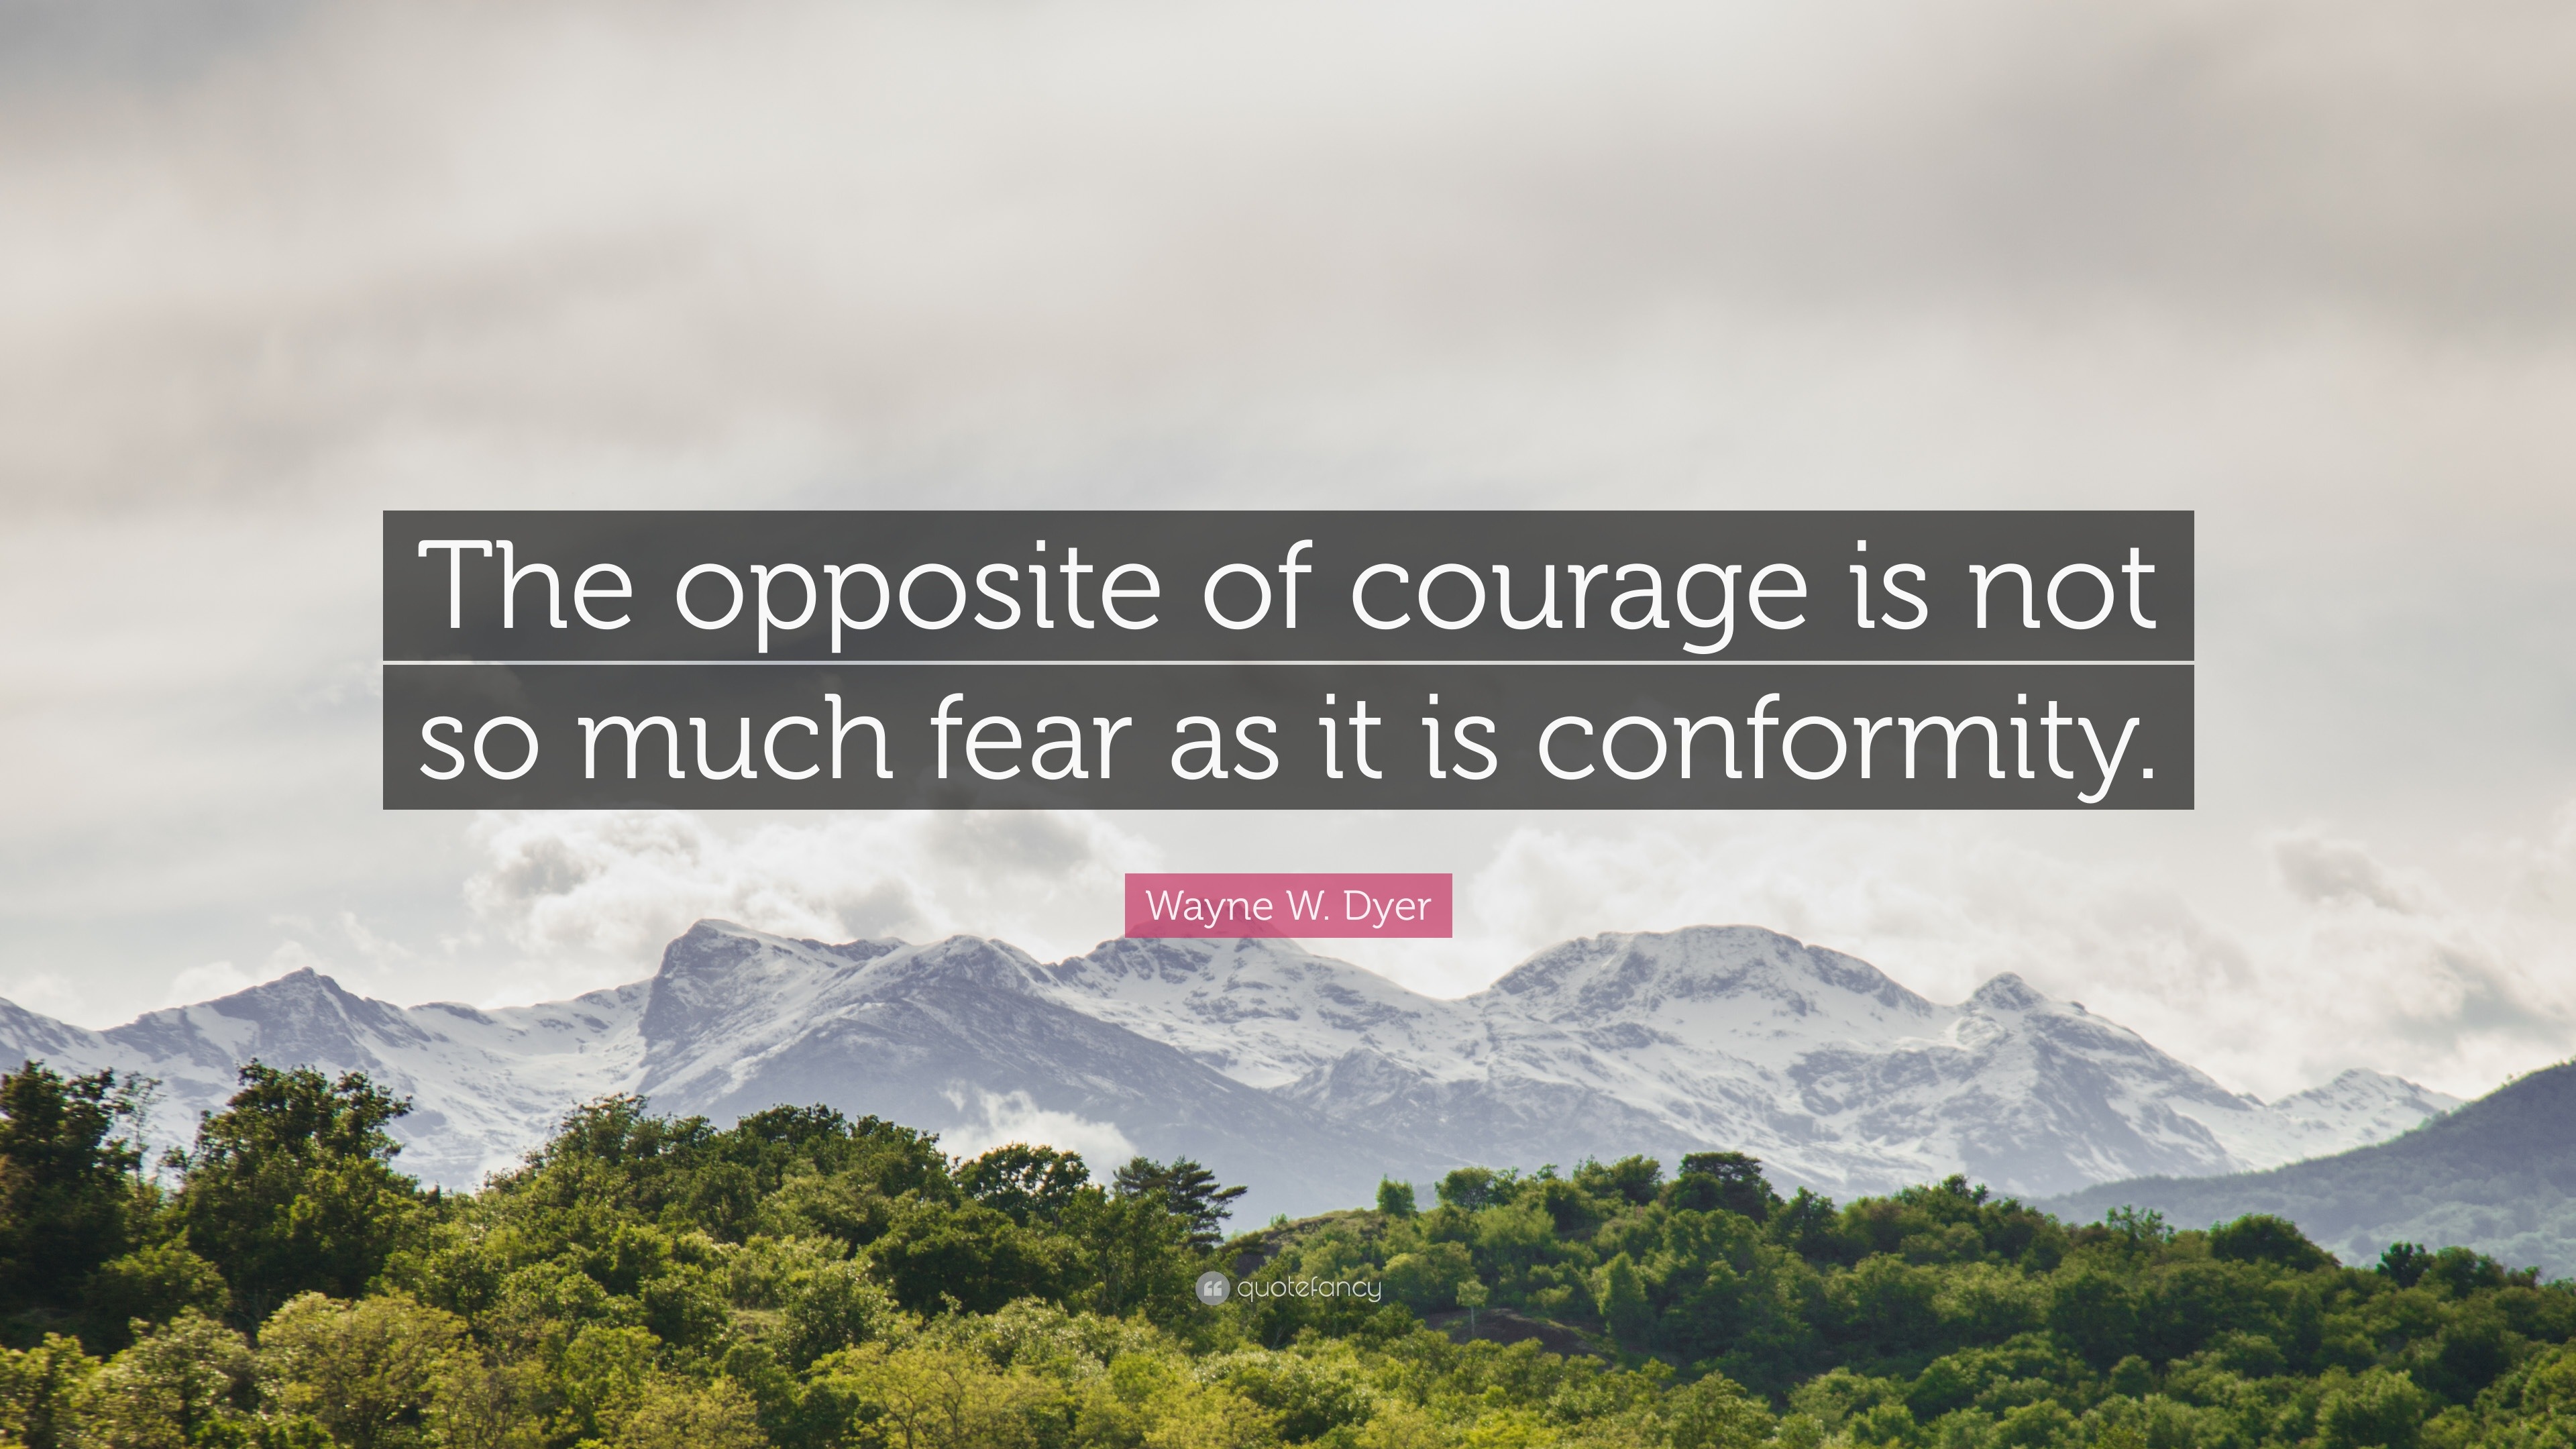 Wayne W. Dyer Quote: “The opposite of courage is not so much fear as it ...